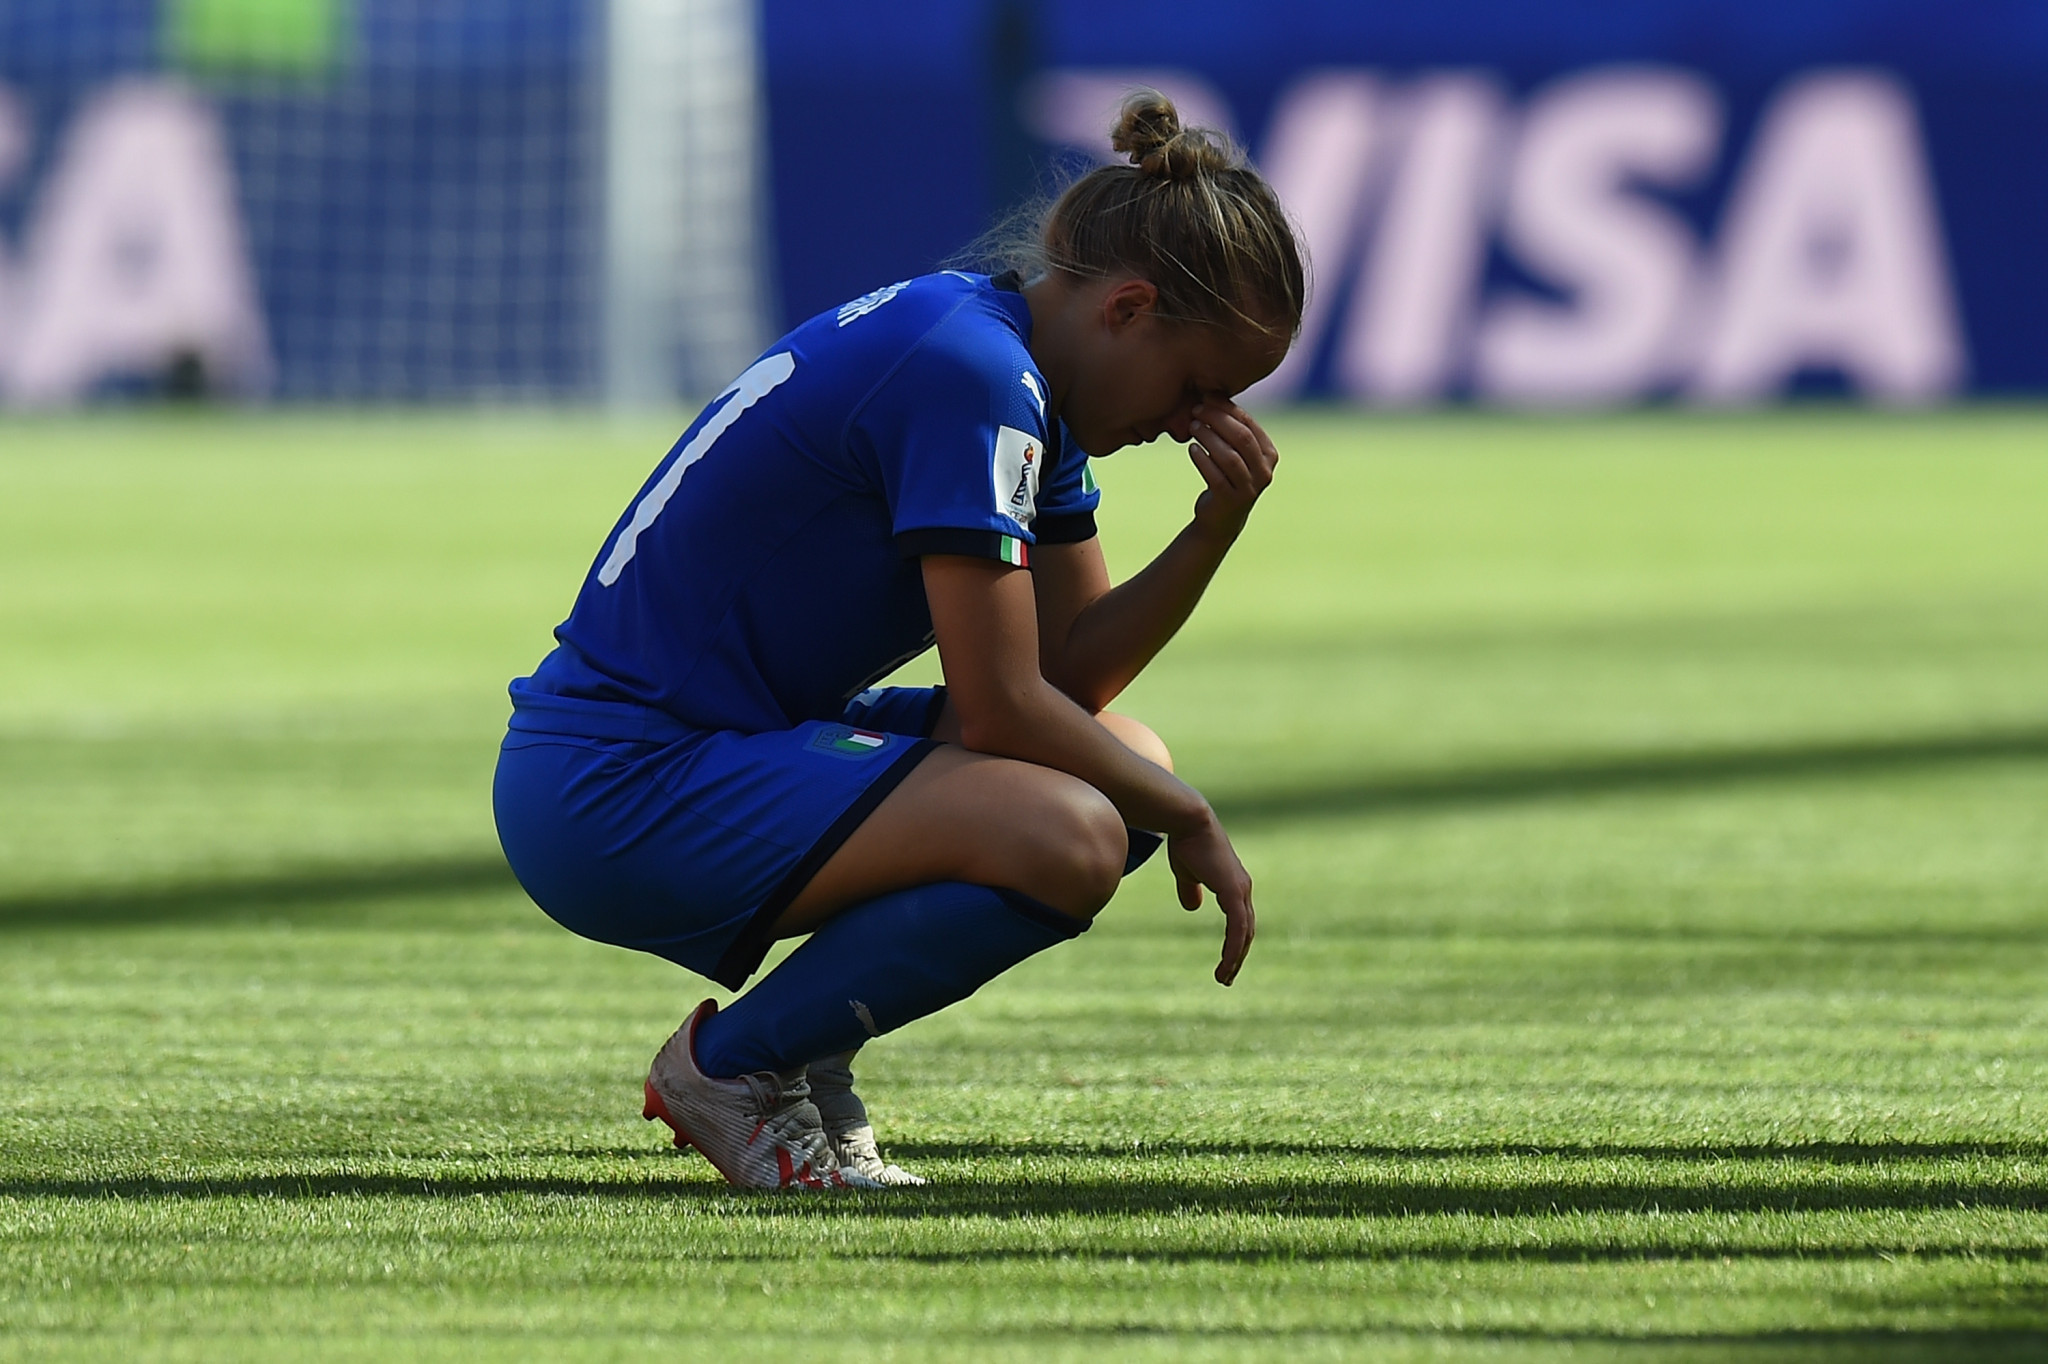 Italy's Valentina Cernoiaof is dejected after the final whistle ©Getty Images